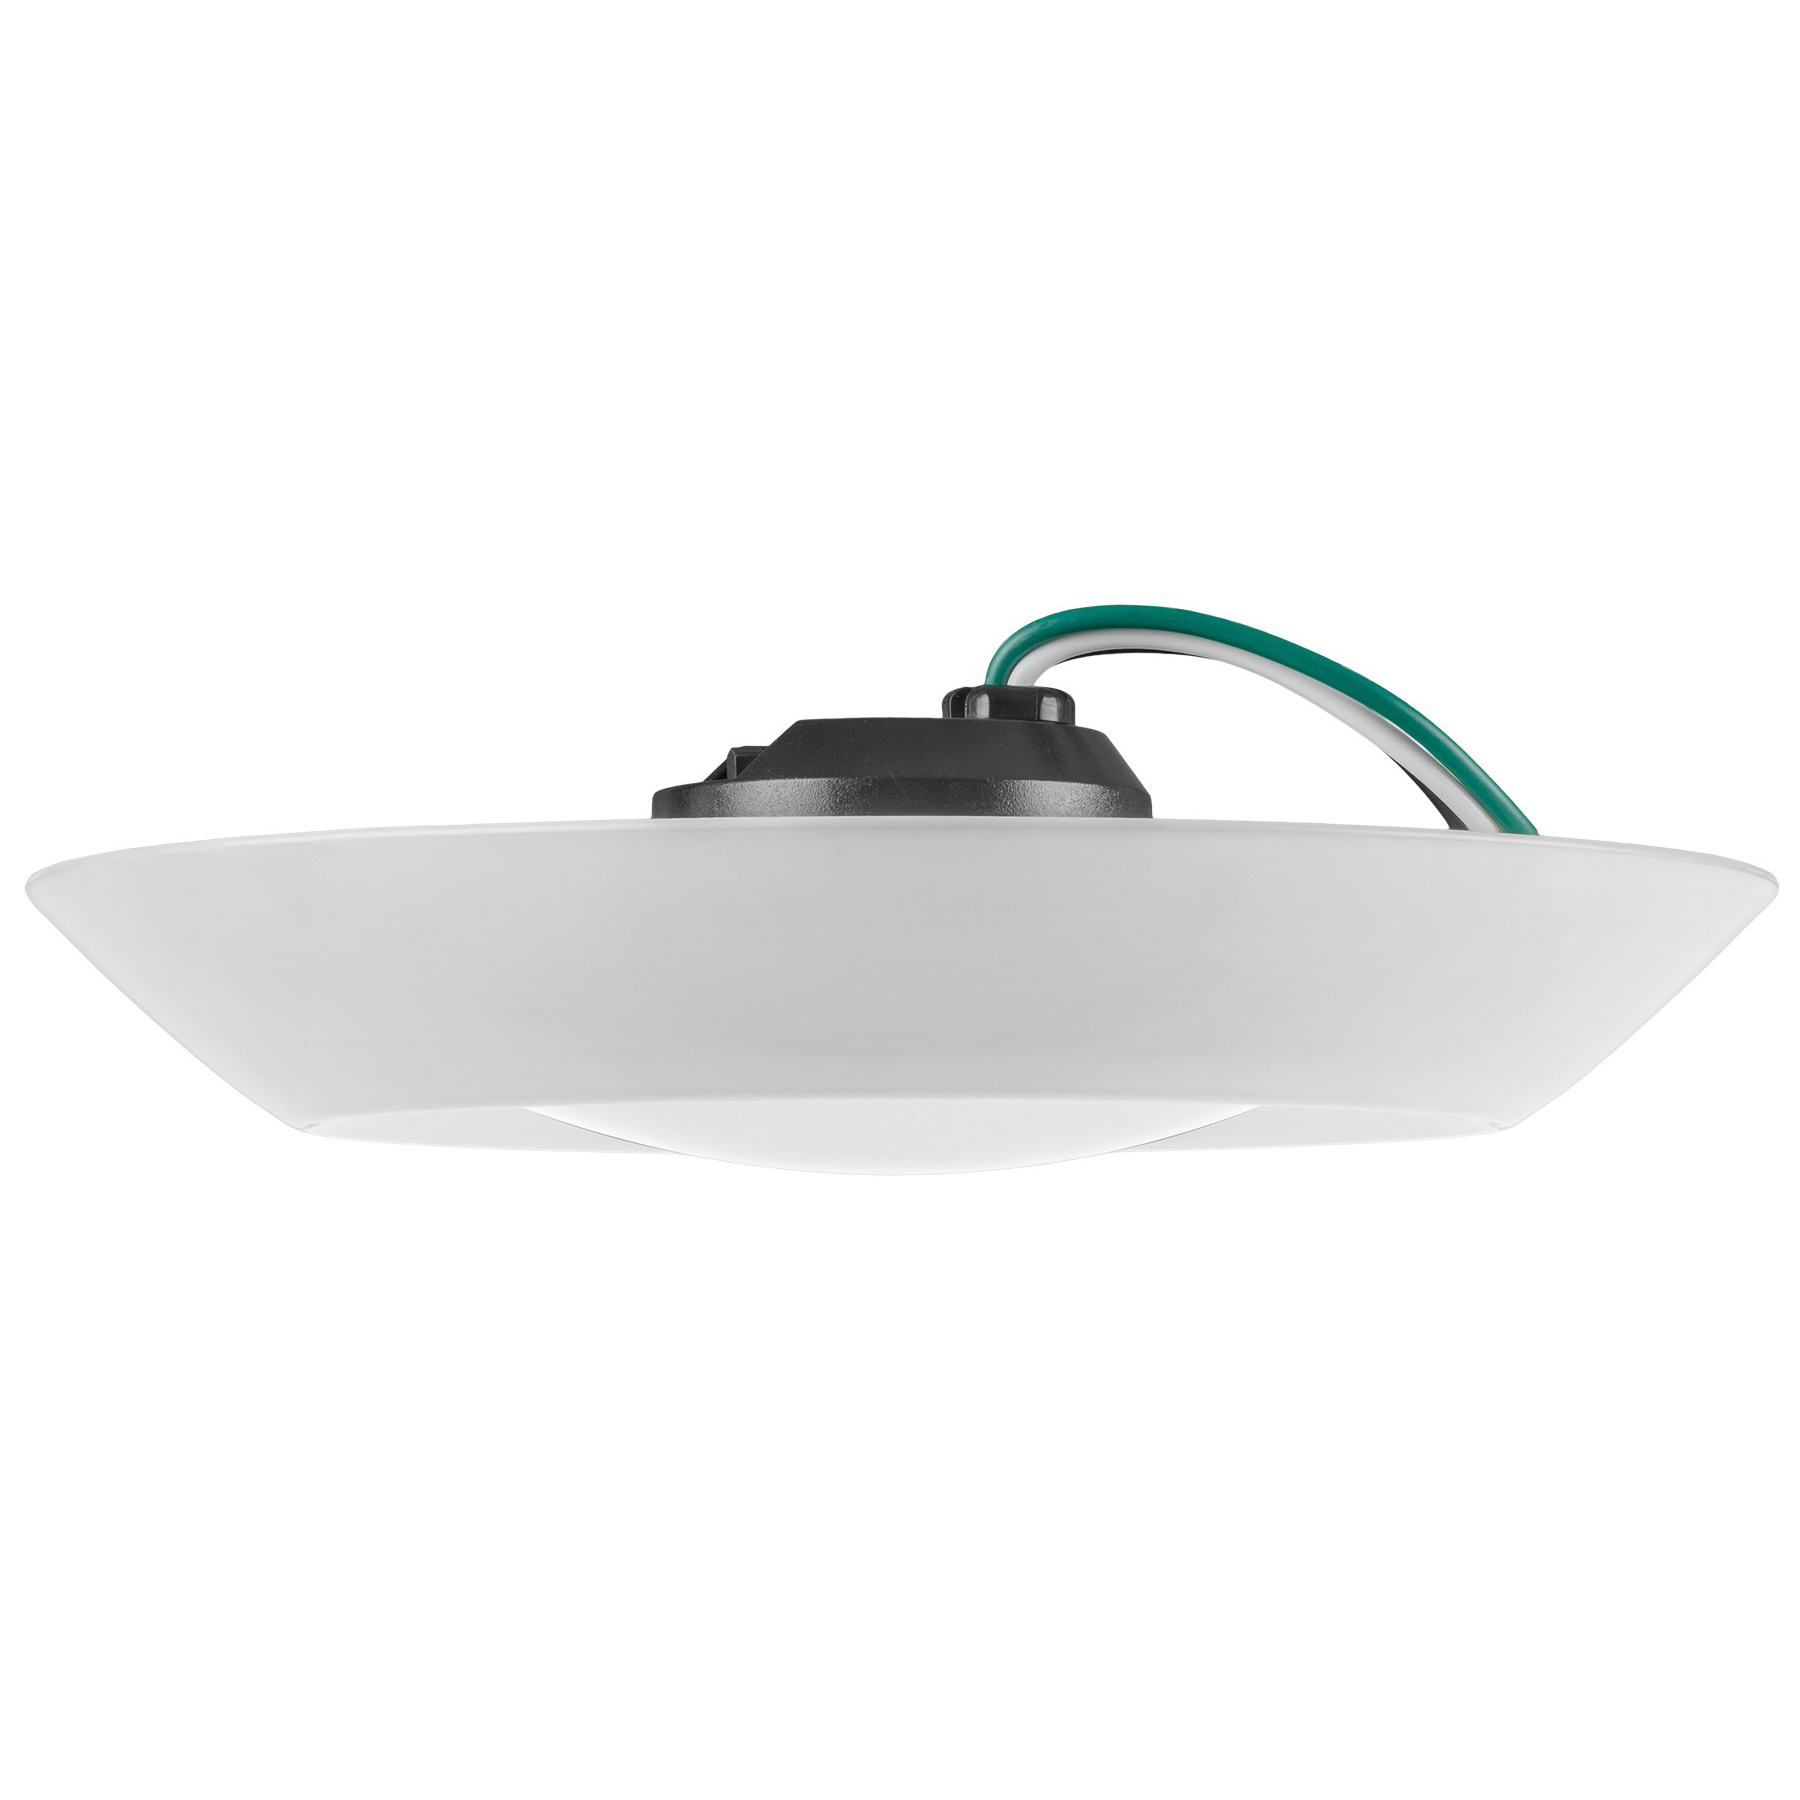 56578211 Surface Mount Disk Light, 5, 6 in Dia Recessed Can